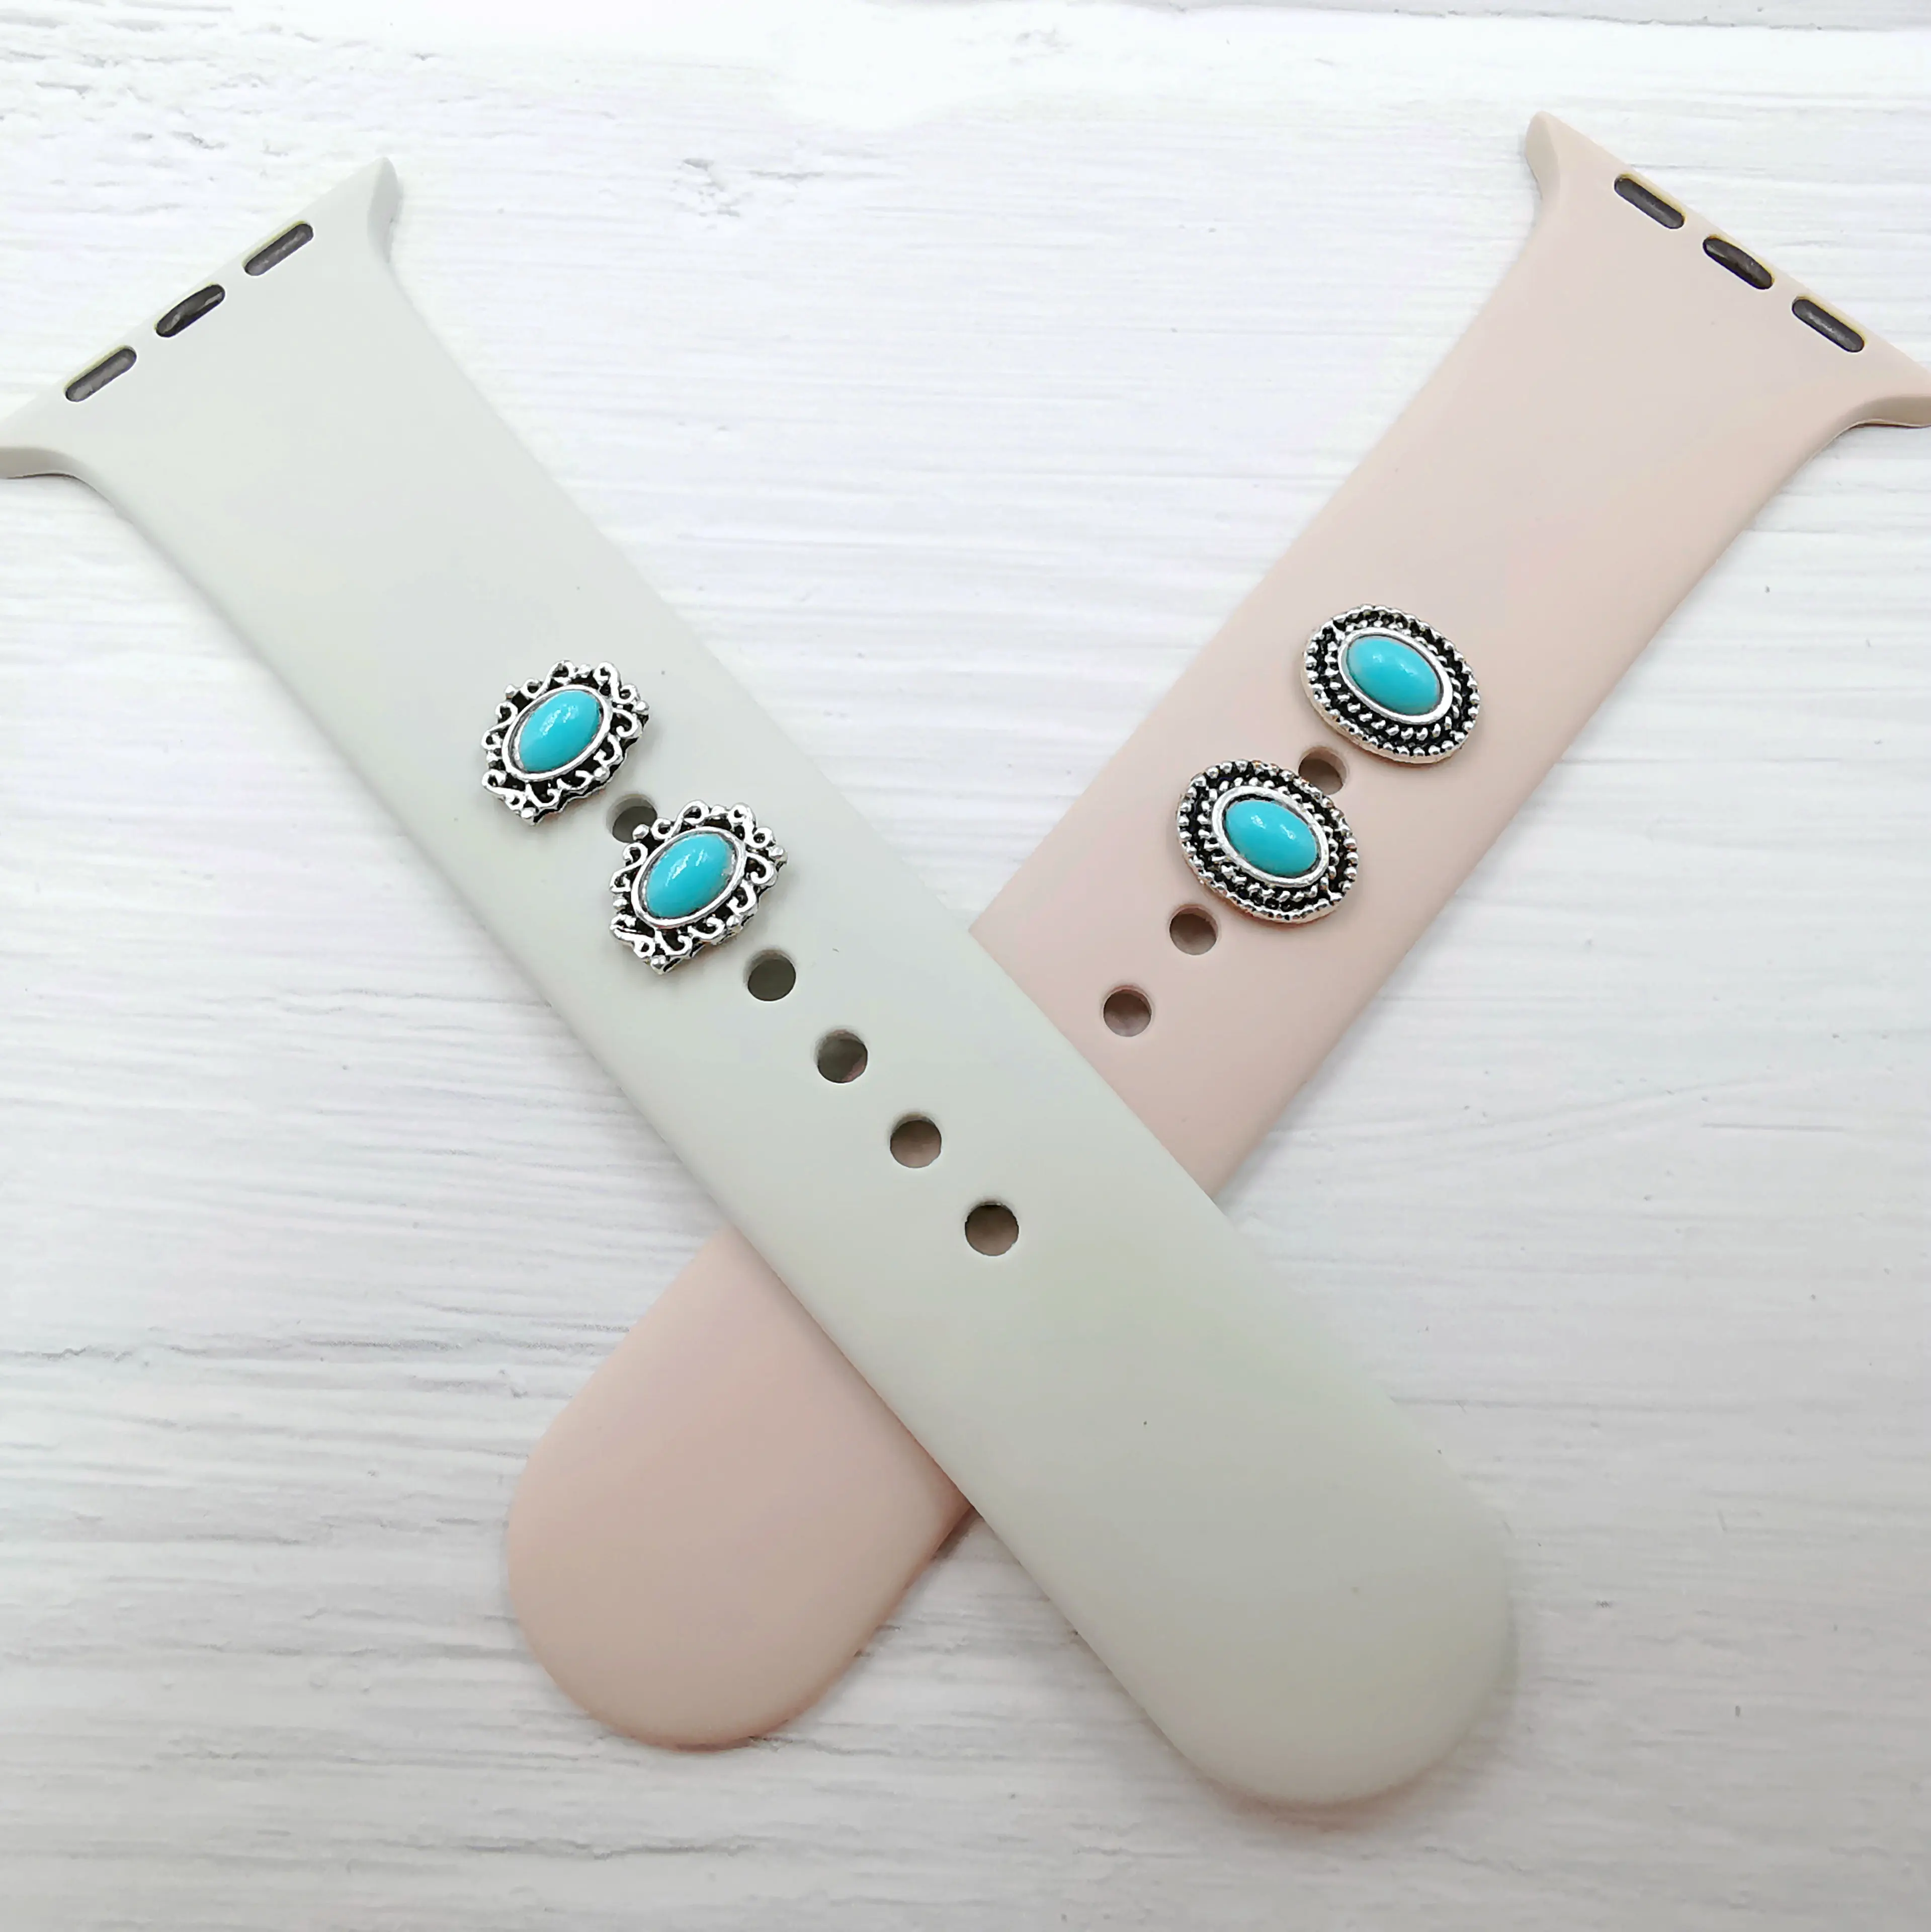 Vintage Turquoise Stone Watch Band Charms for Apple Watch SmartWatch Sport Silicone Strap Accessories